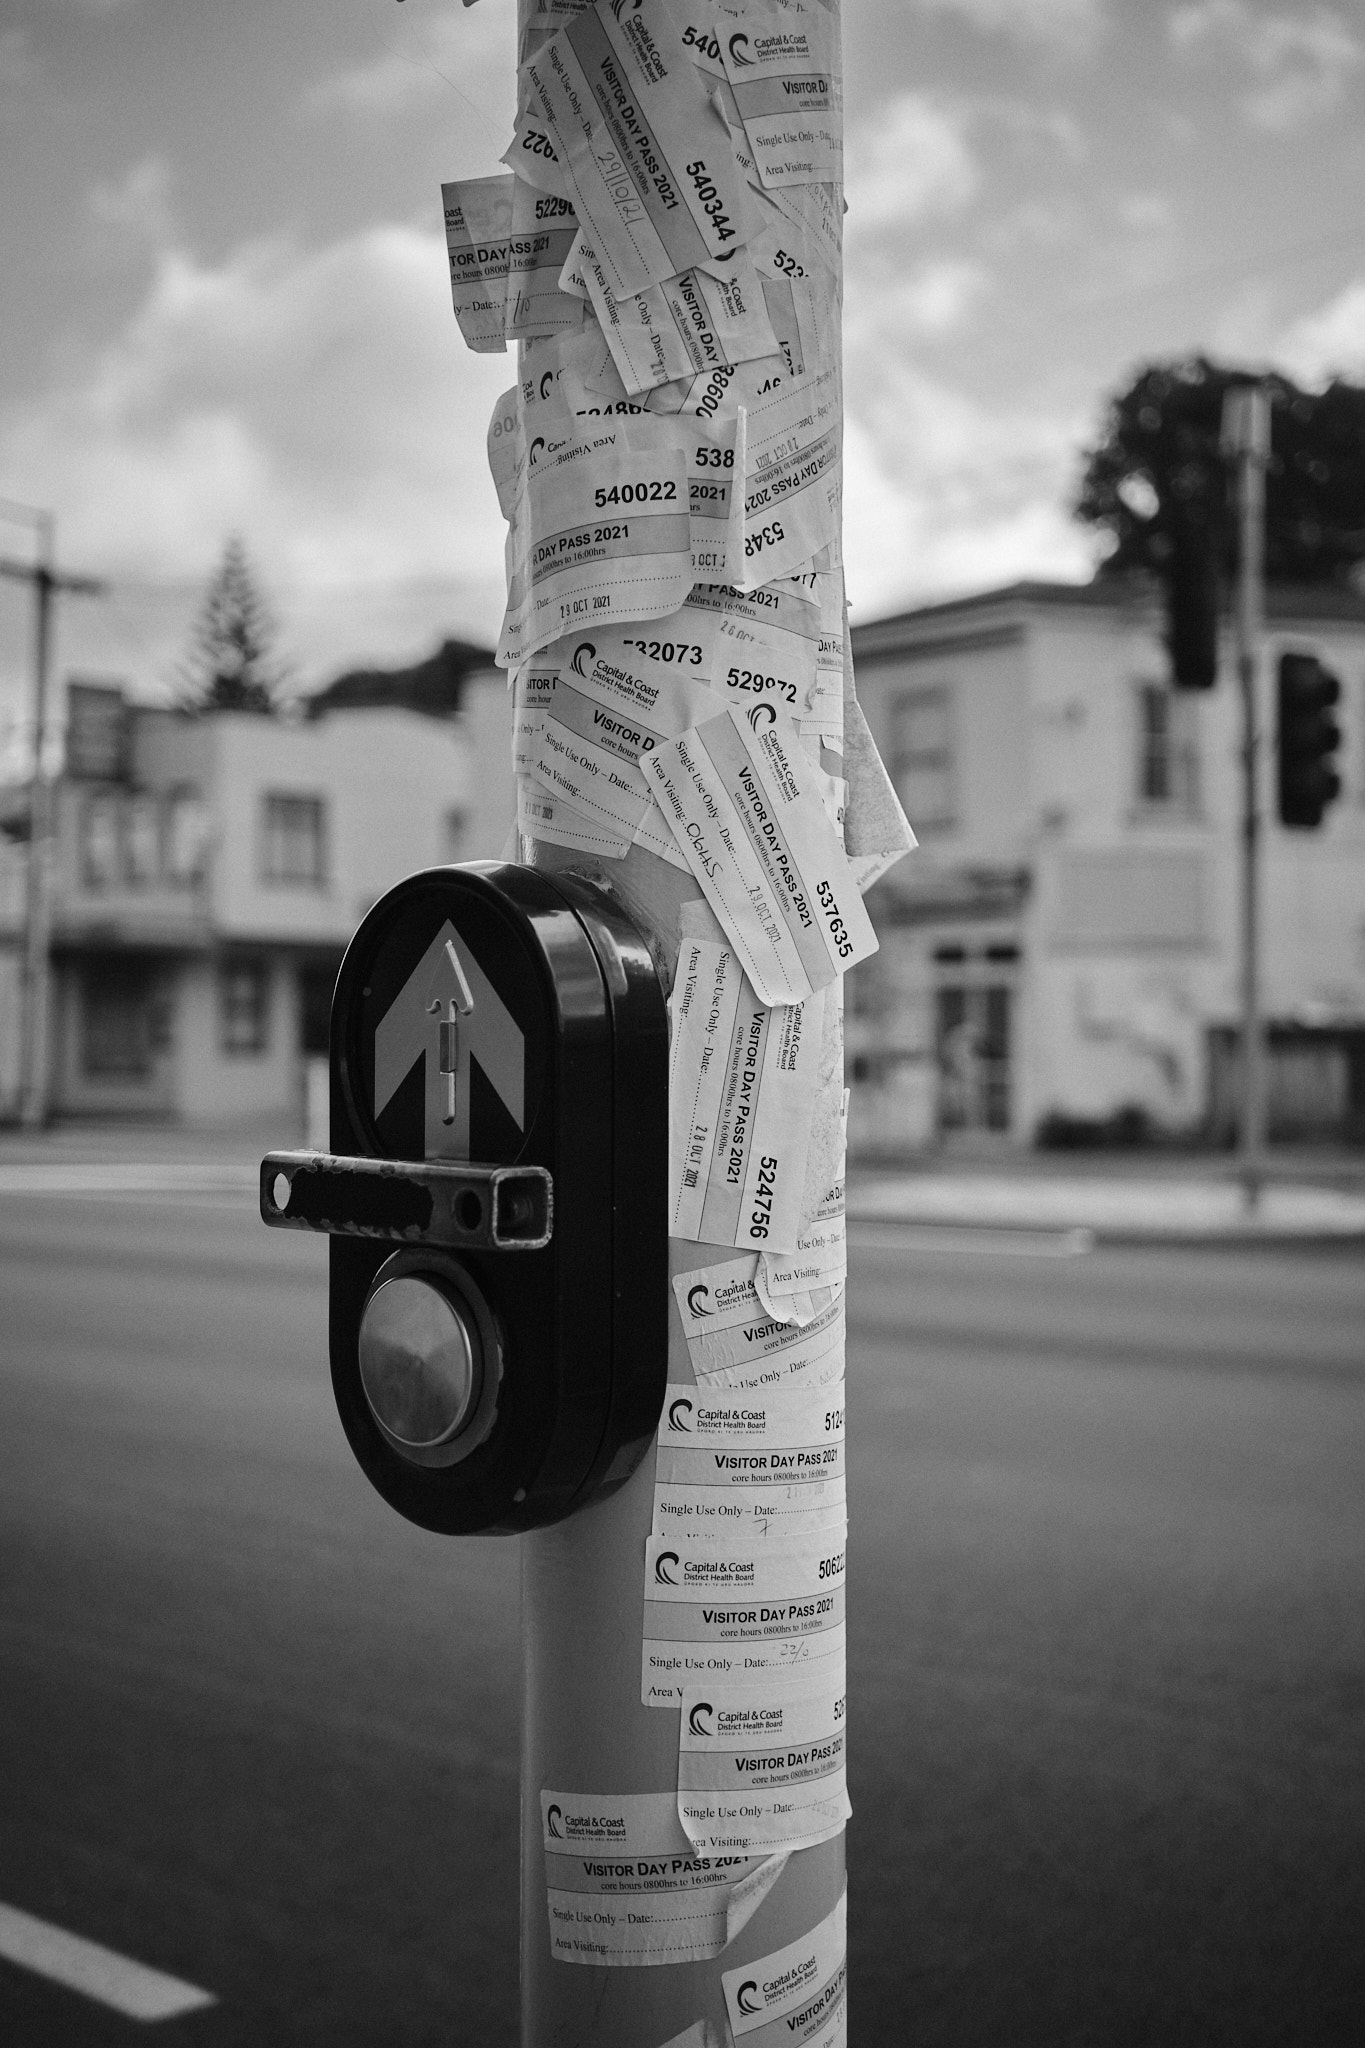 A pole for a street crossing covered by day passes for Wellington Hospital